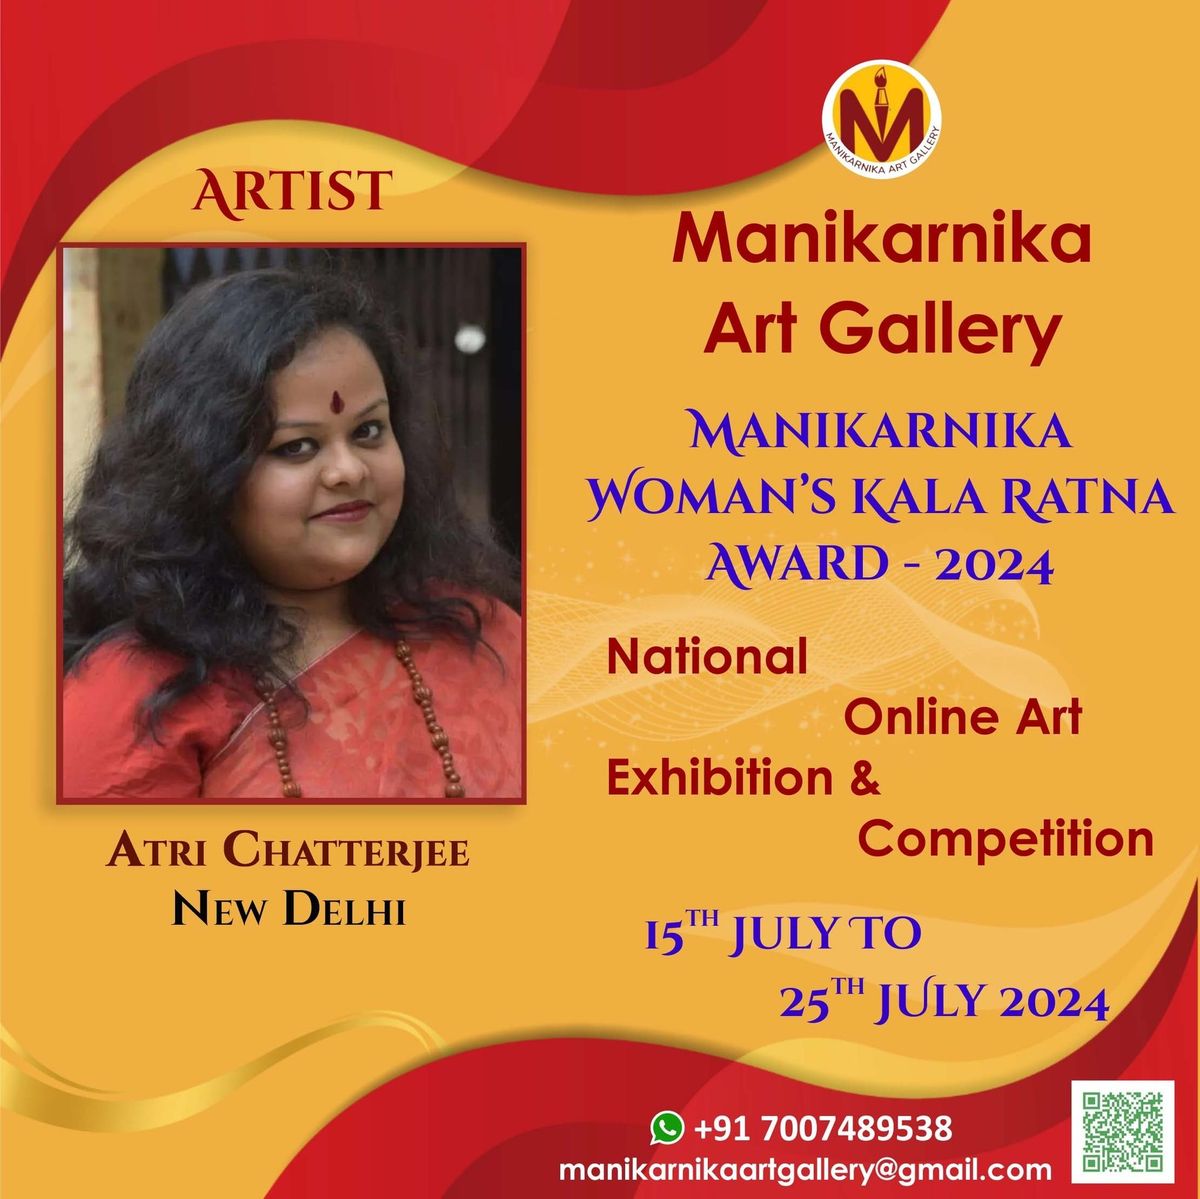 My upcoming 3rd time art exhibition